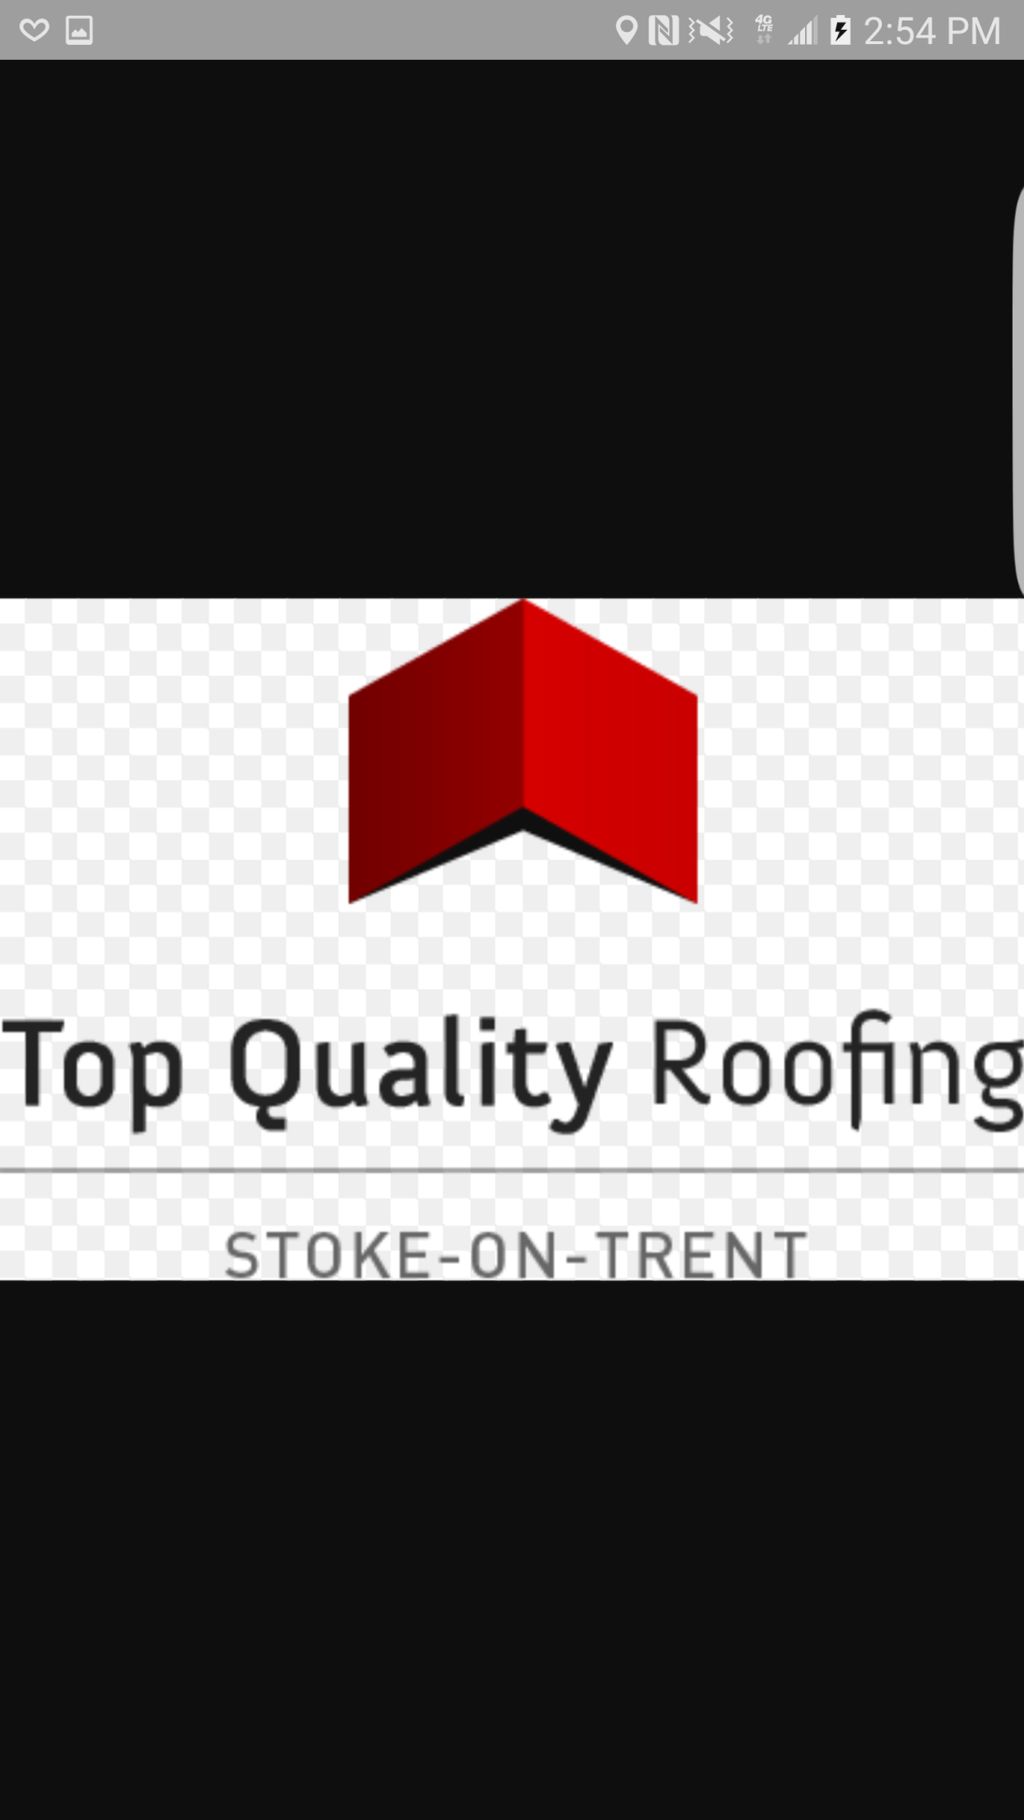 topqualityroofing  family-owned since 25 years